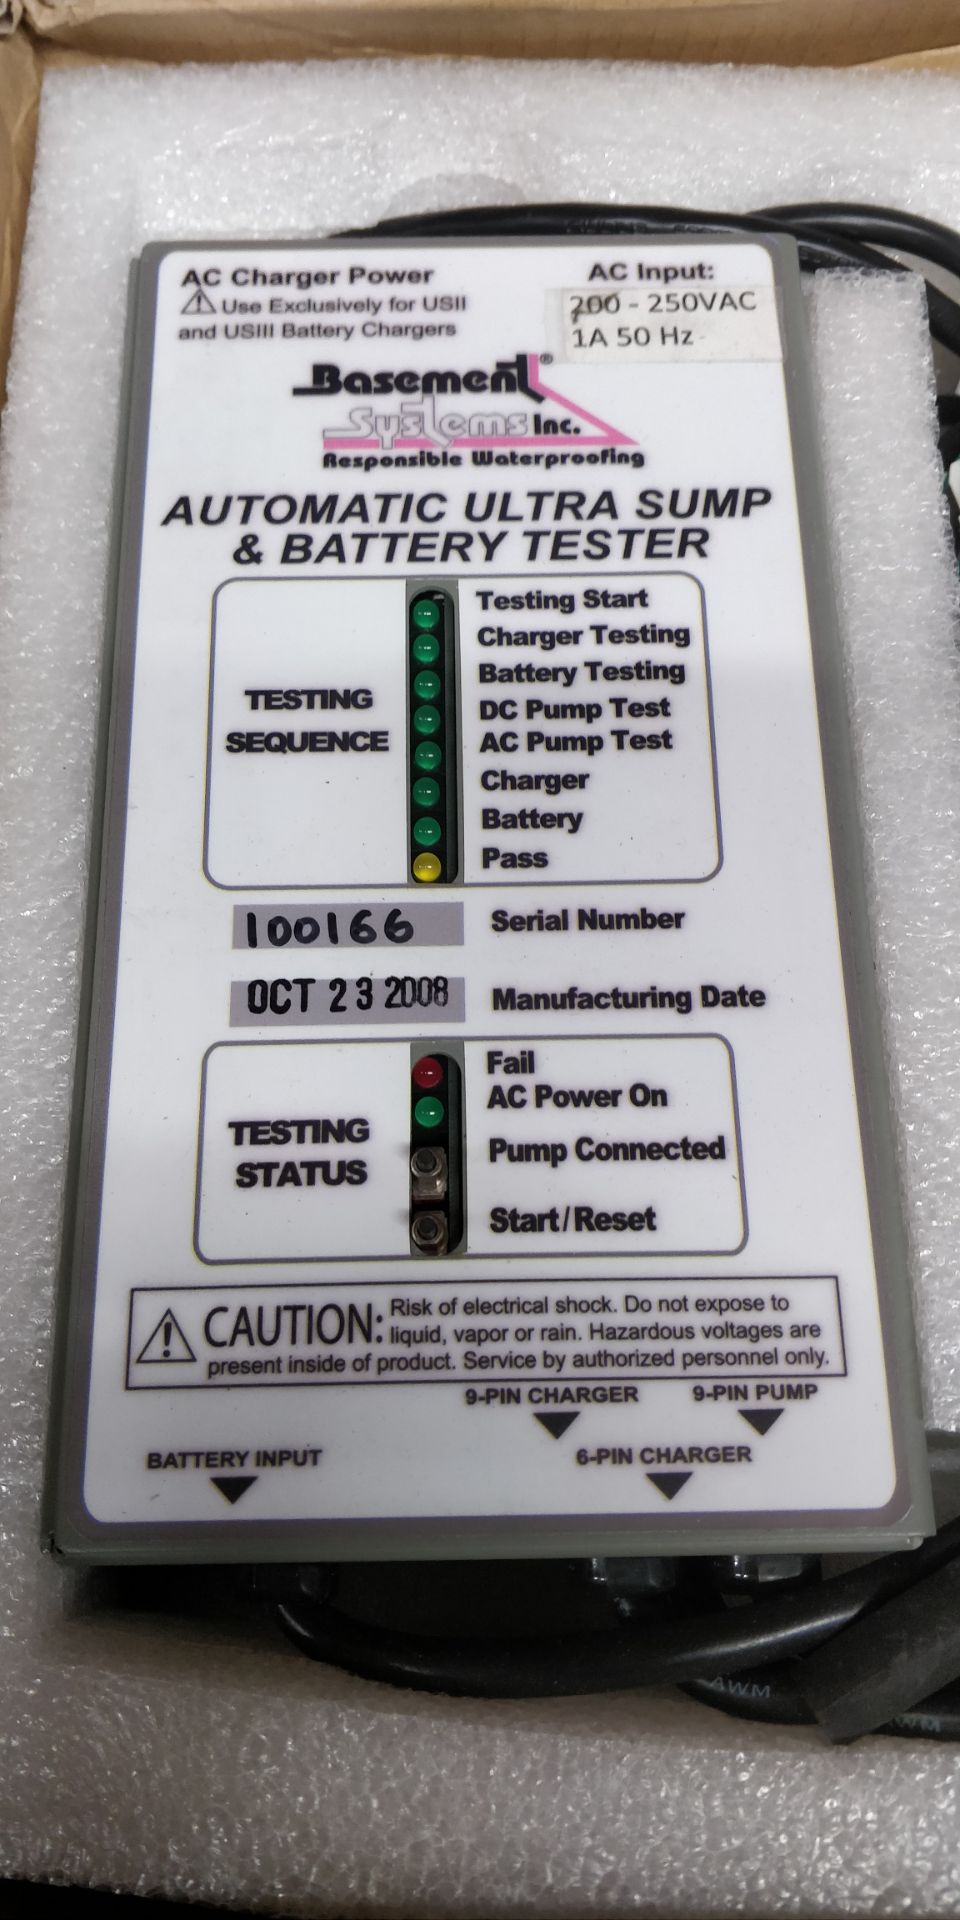 1 x Basement System Automatic Ultra Sump and Battery Tester - Model 92159 - New and Boxed - - Image 5 of 6